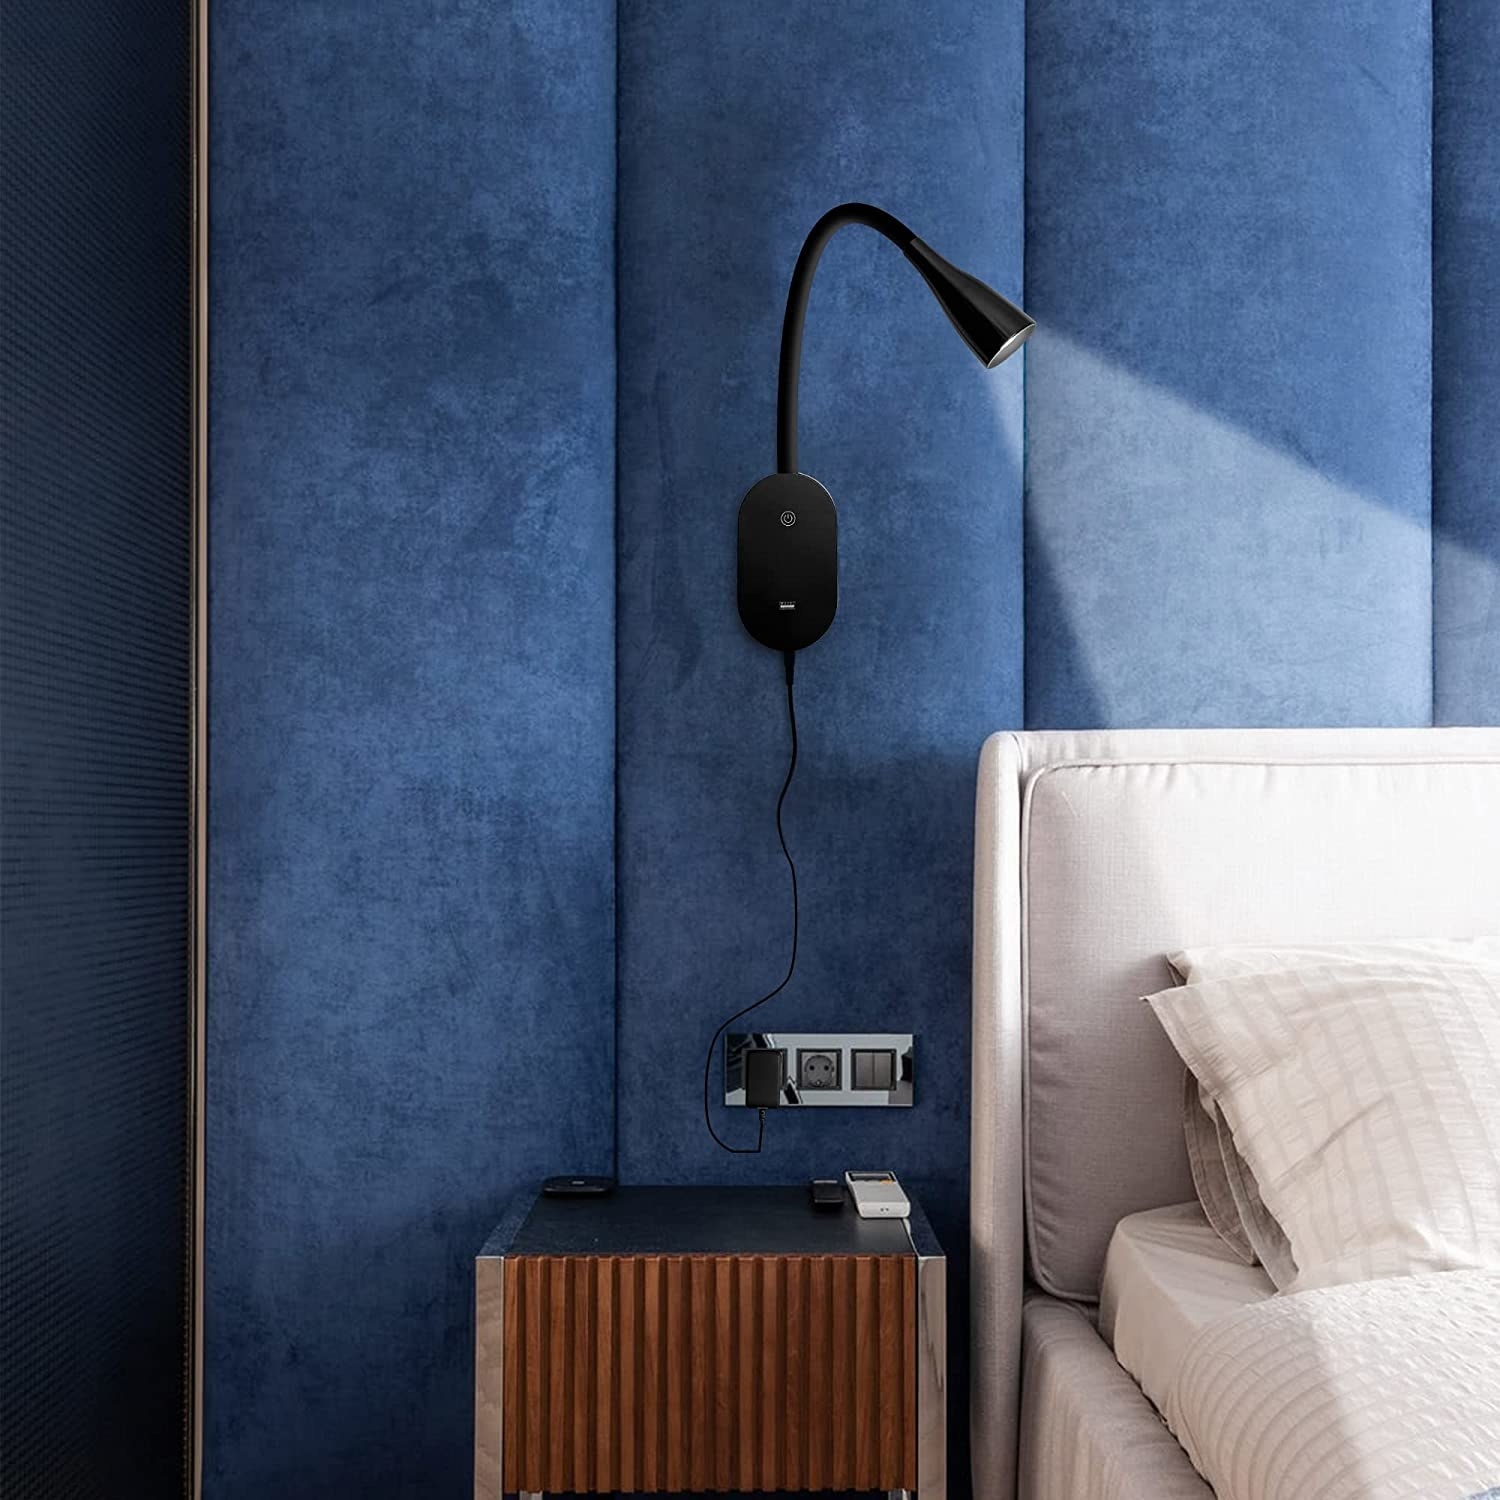 the wall lamp above a side table projecting on a bed